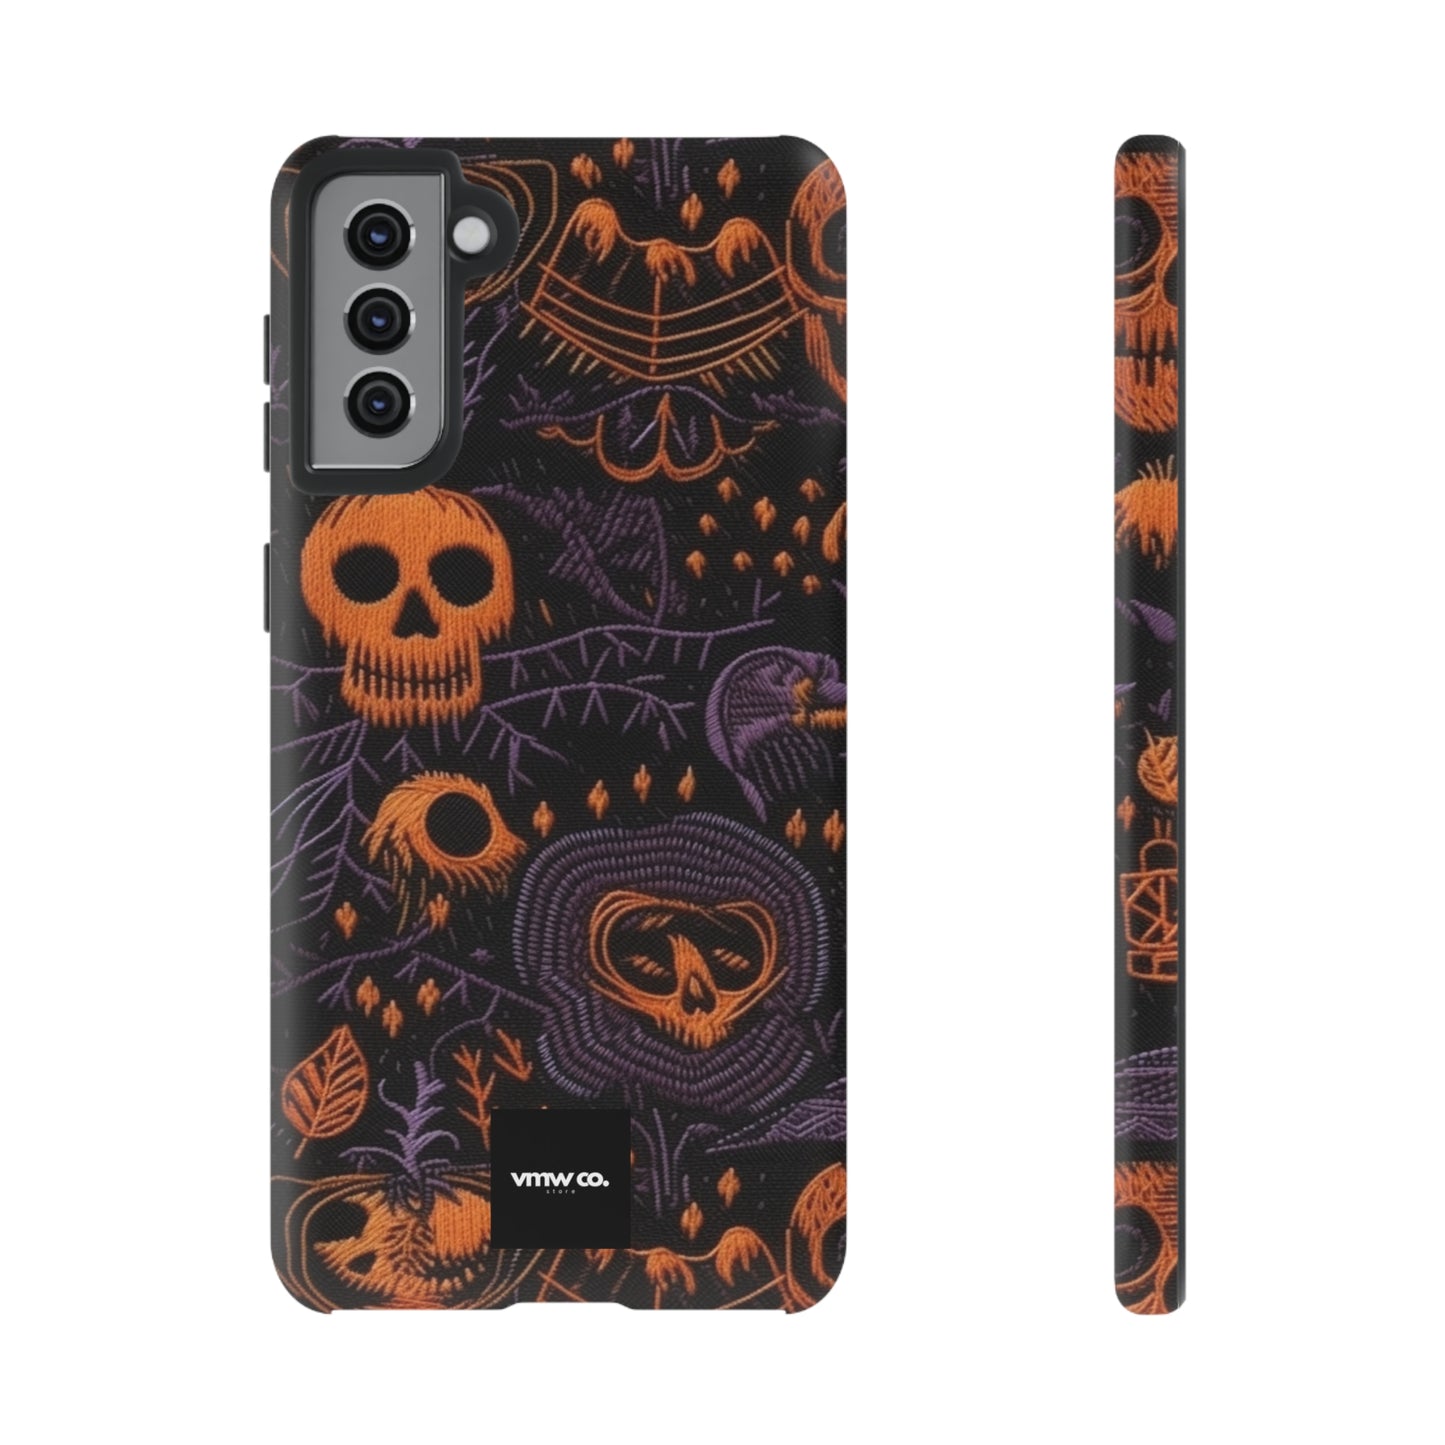 Embroidered Skull Black Purple Android Tough Cases